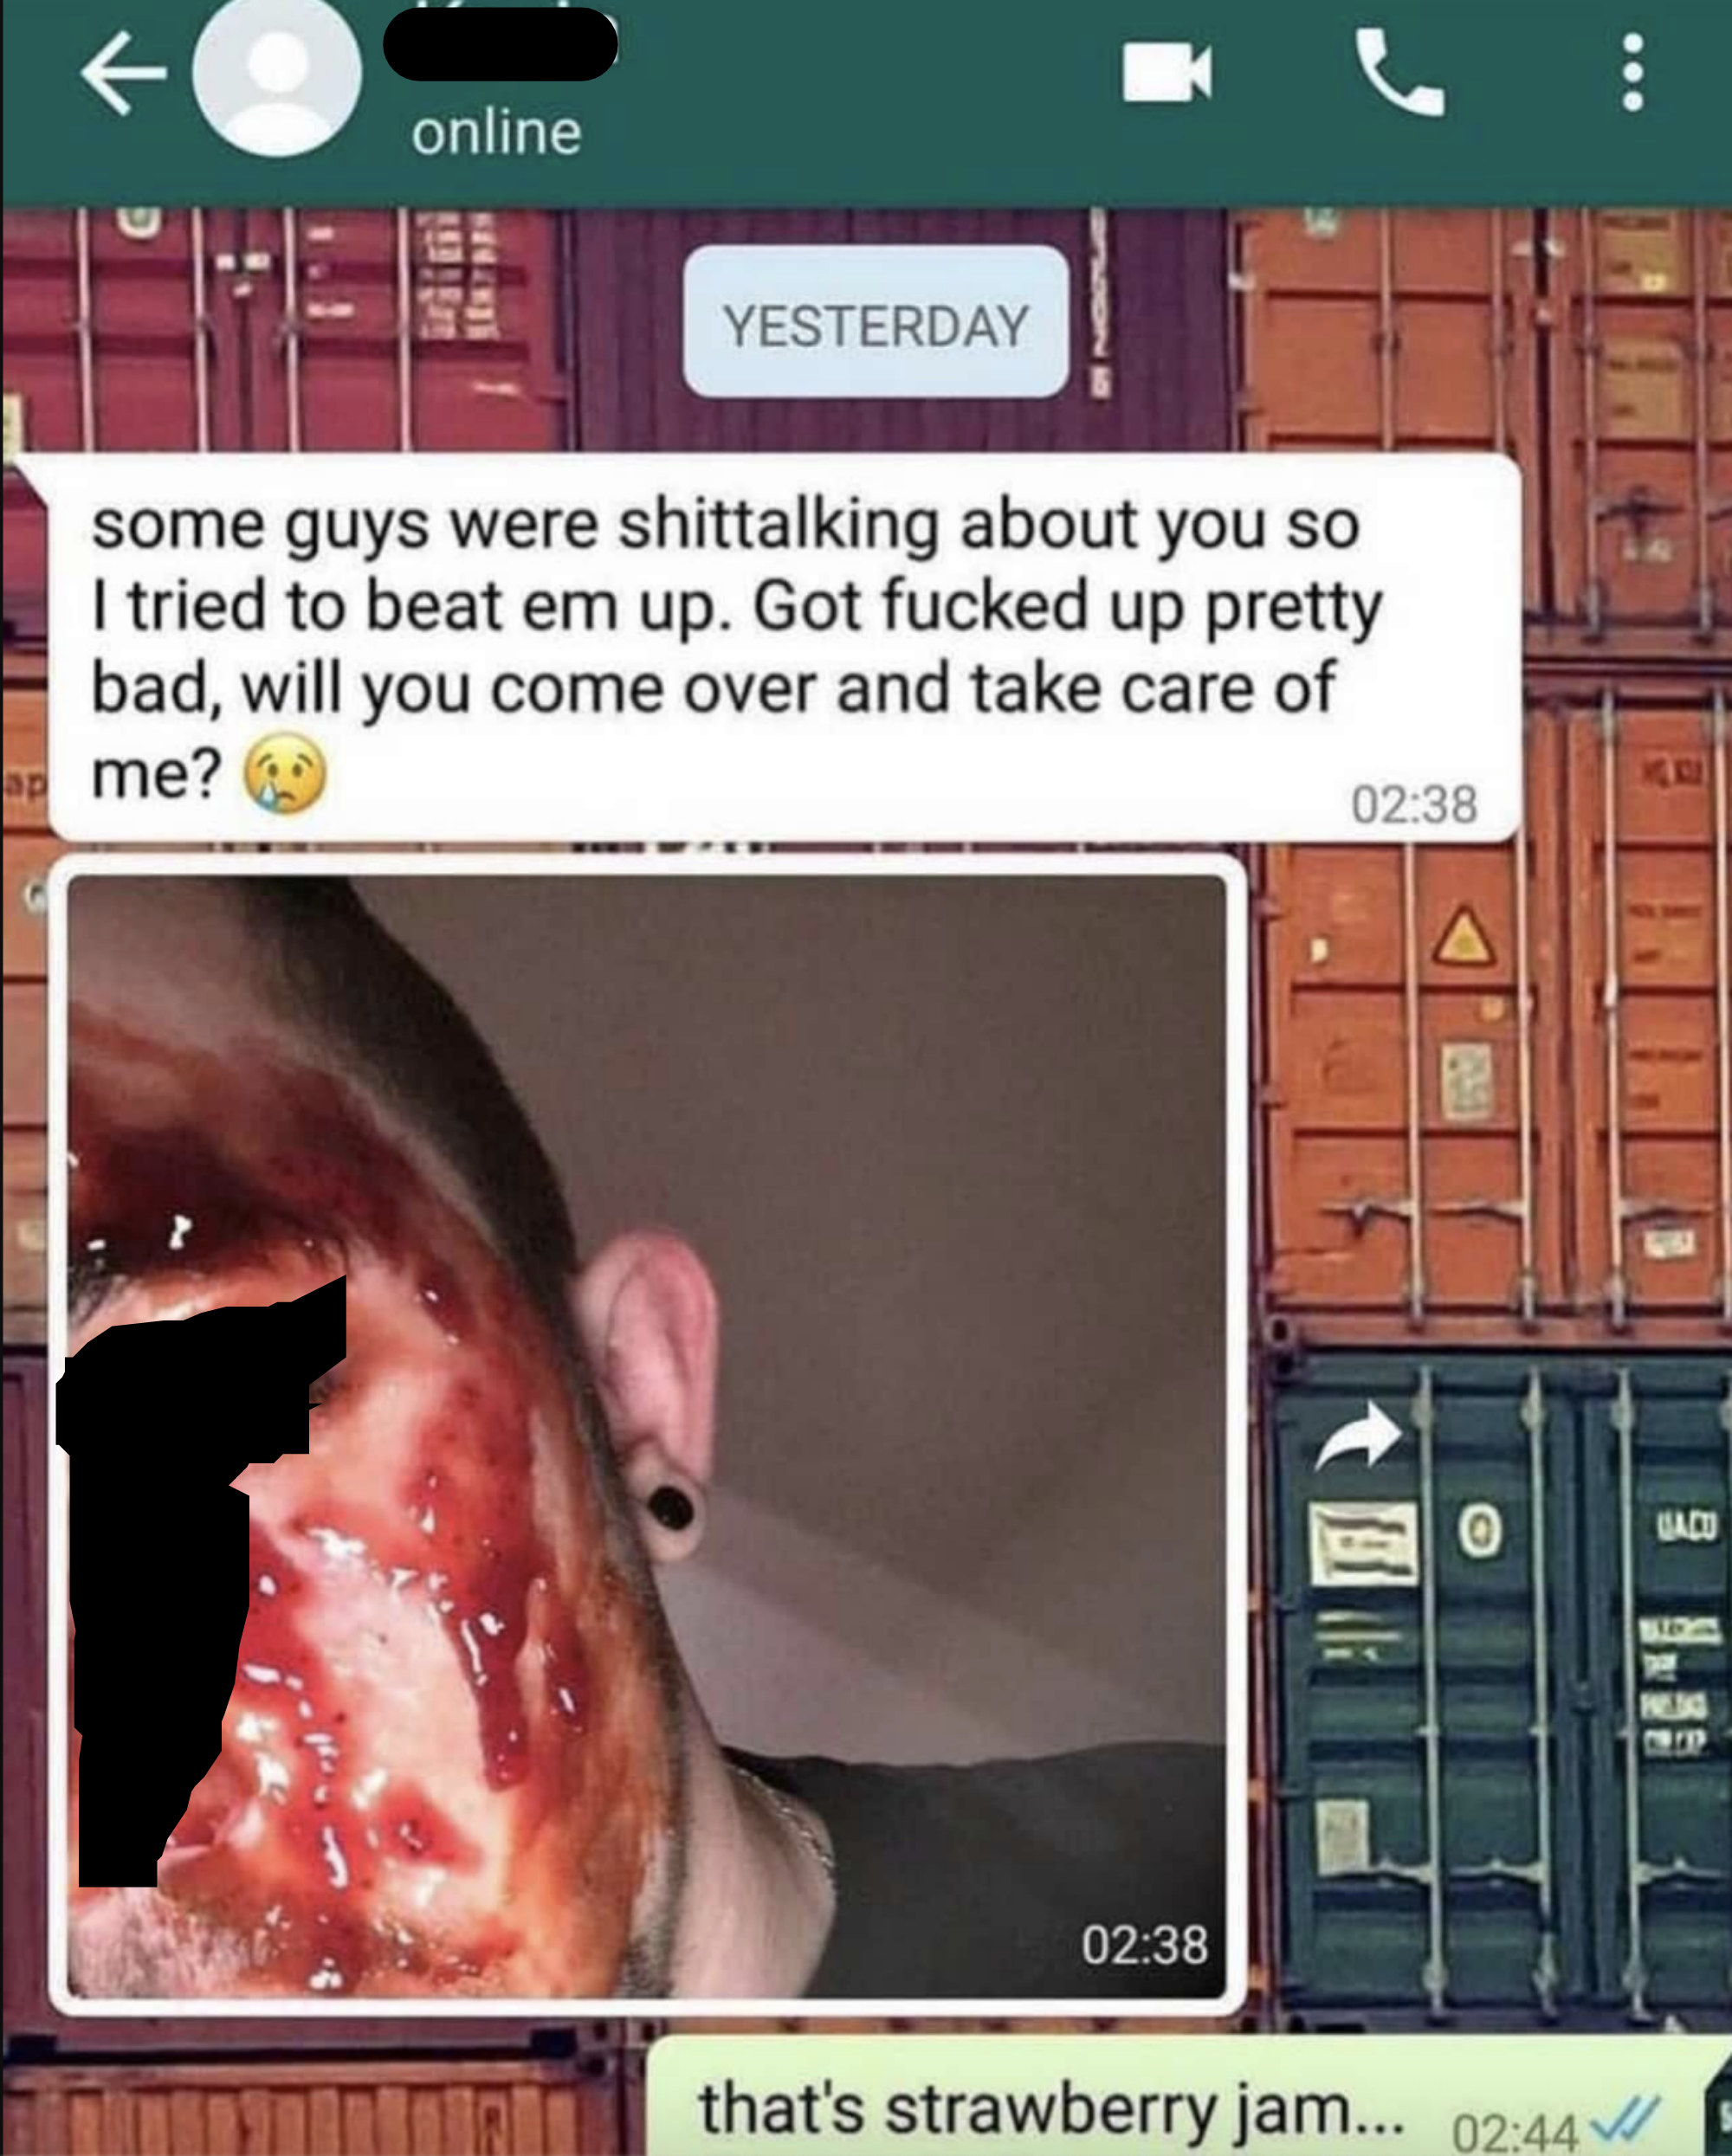 someone tries to say they&#x27;ve been beat up and sends a selfie and the person responds, that&#x27;s strawberry jam